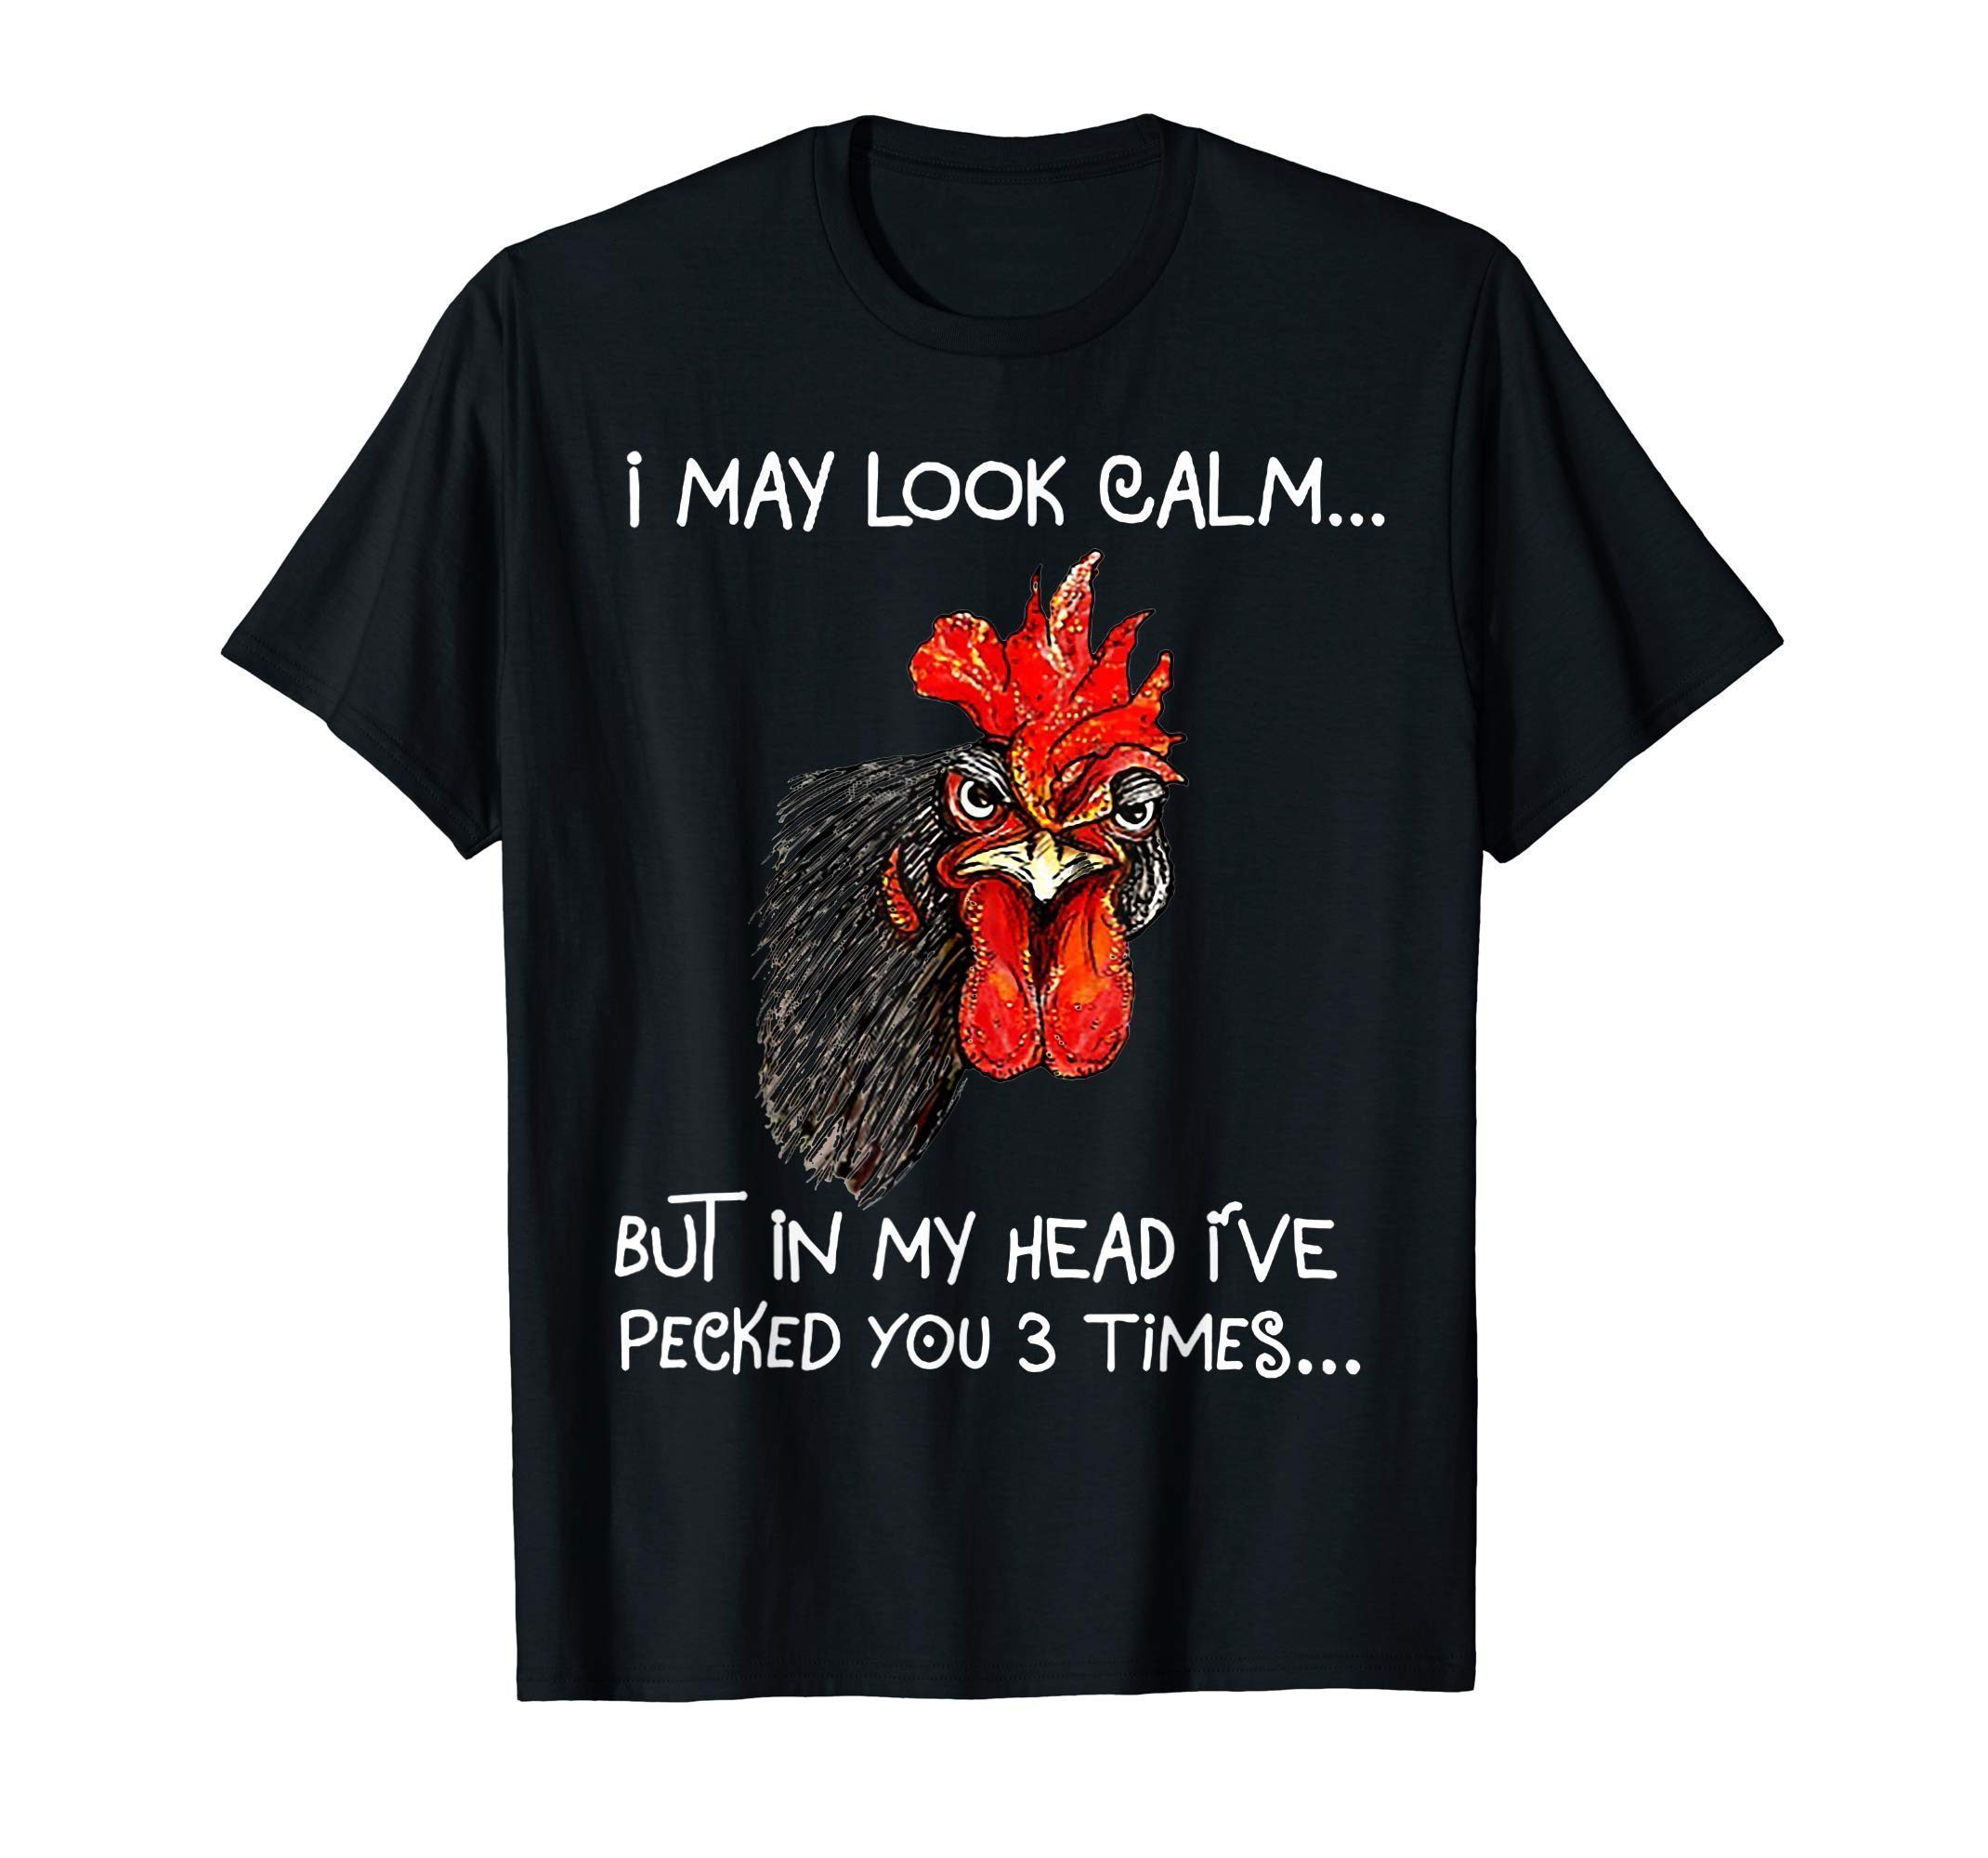 I May Look Calm But In My Head I've Pecked You 3 Times Shirt ...